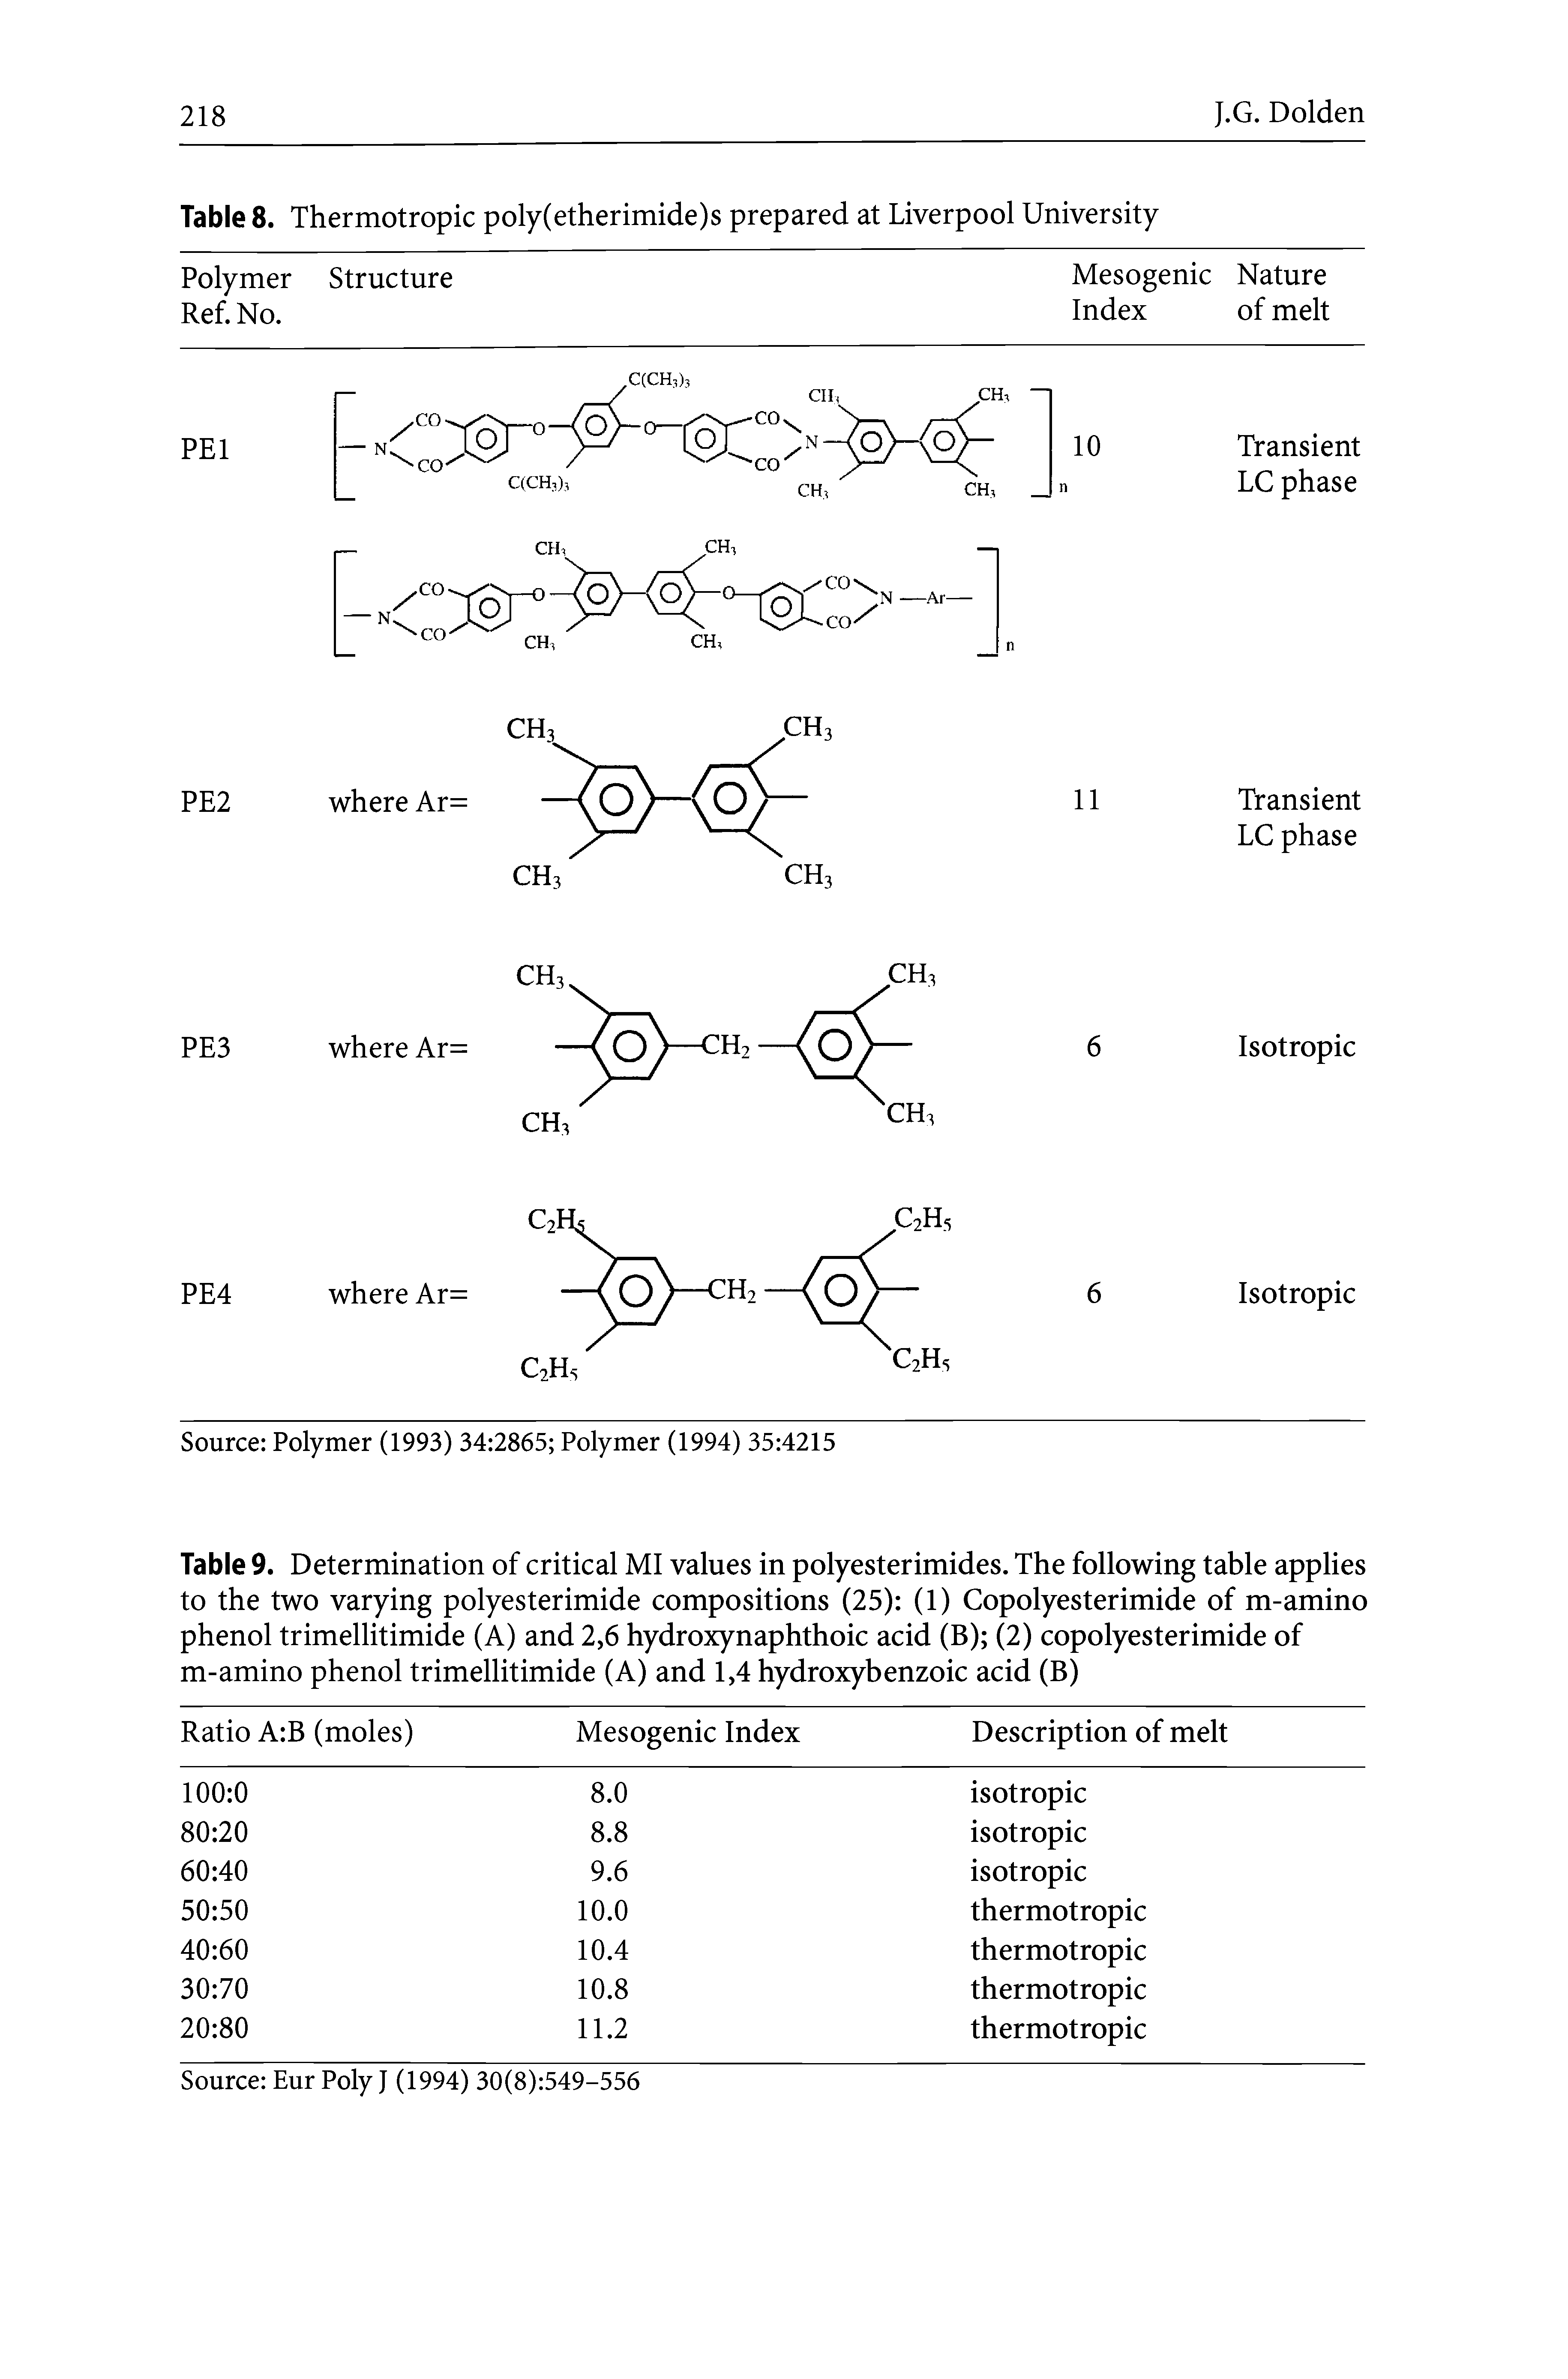 Table 9. Determination of critical MI values in polyesterimides. The following table applies to the two varying polyesterimide compositions (25) (1) Copolyesterimide of m-amino phenol trimellitimide (A) and 2,6 hydroxynaphthoic acid (B) (2) copolyesterimide of m-amino phenol trimellitimide (A) and 1,4 hydroxybenzoic acid (B)...